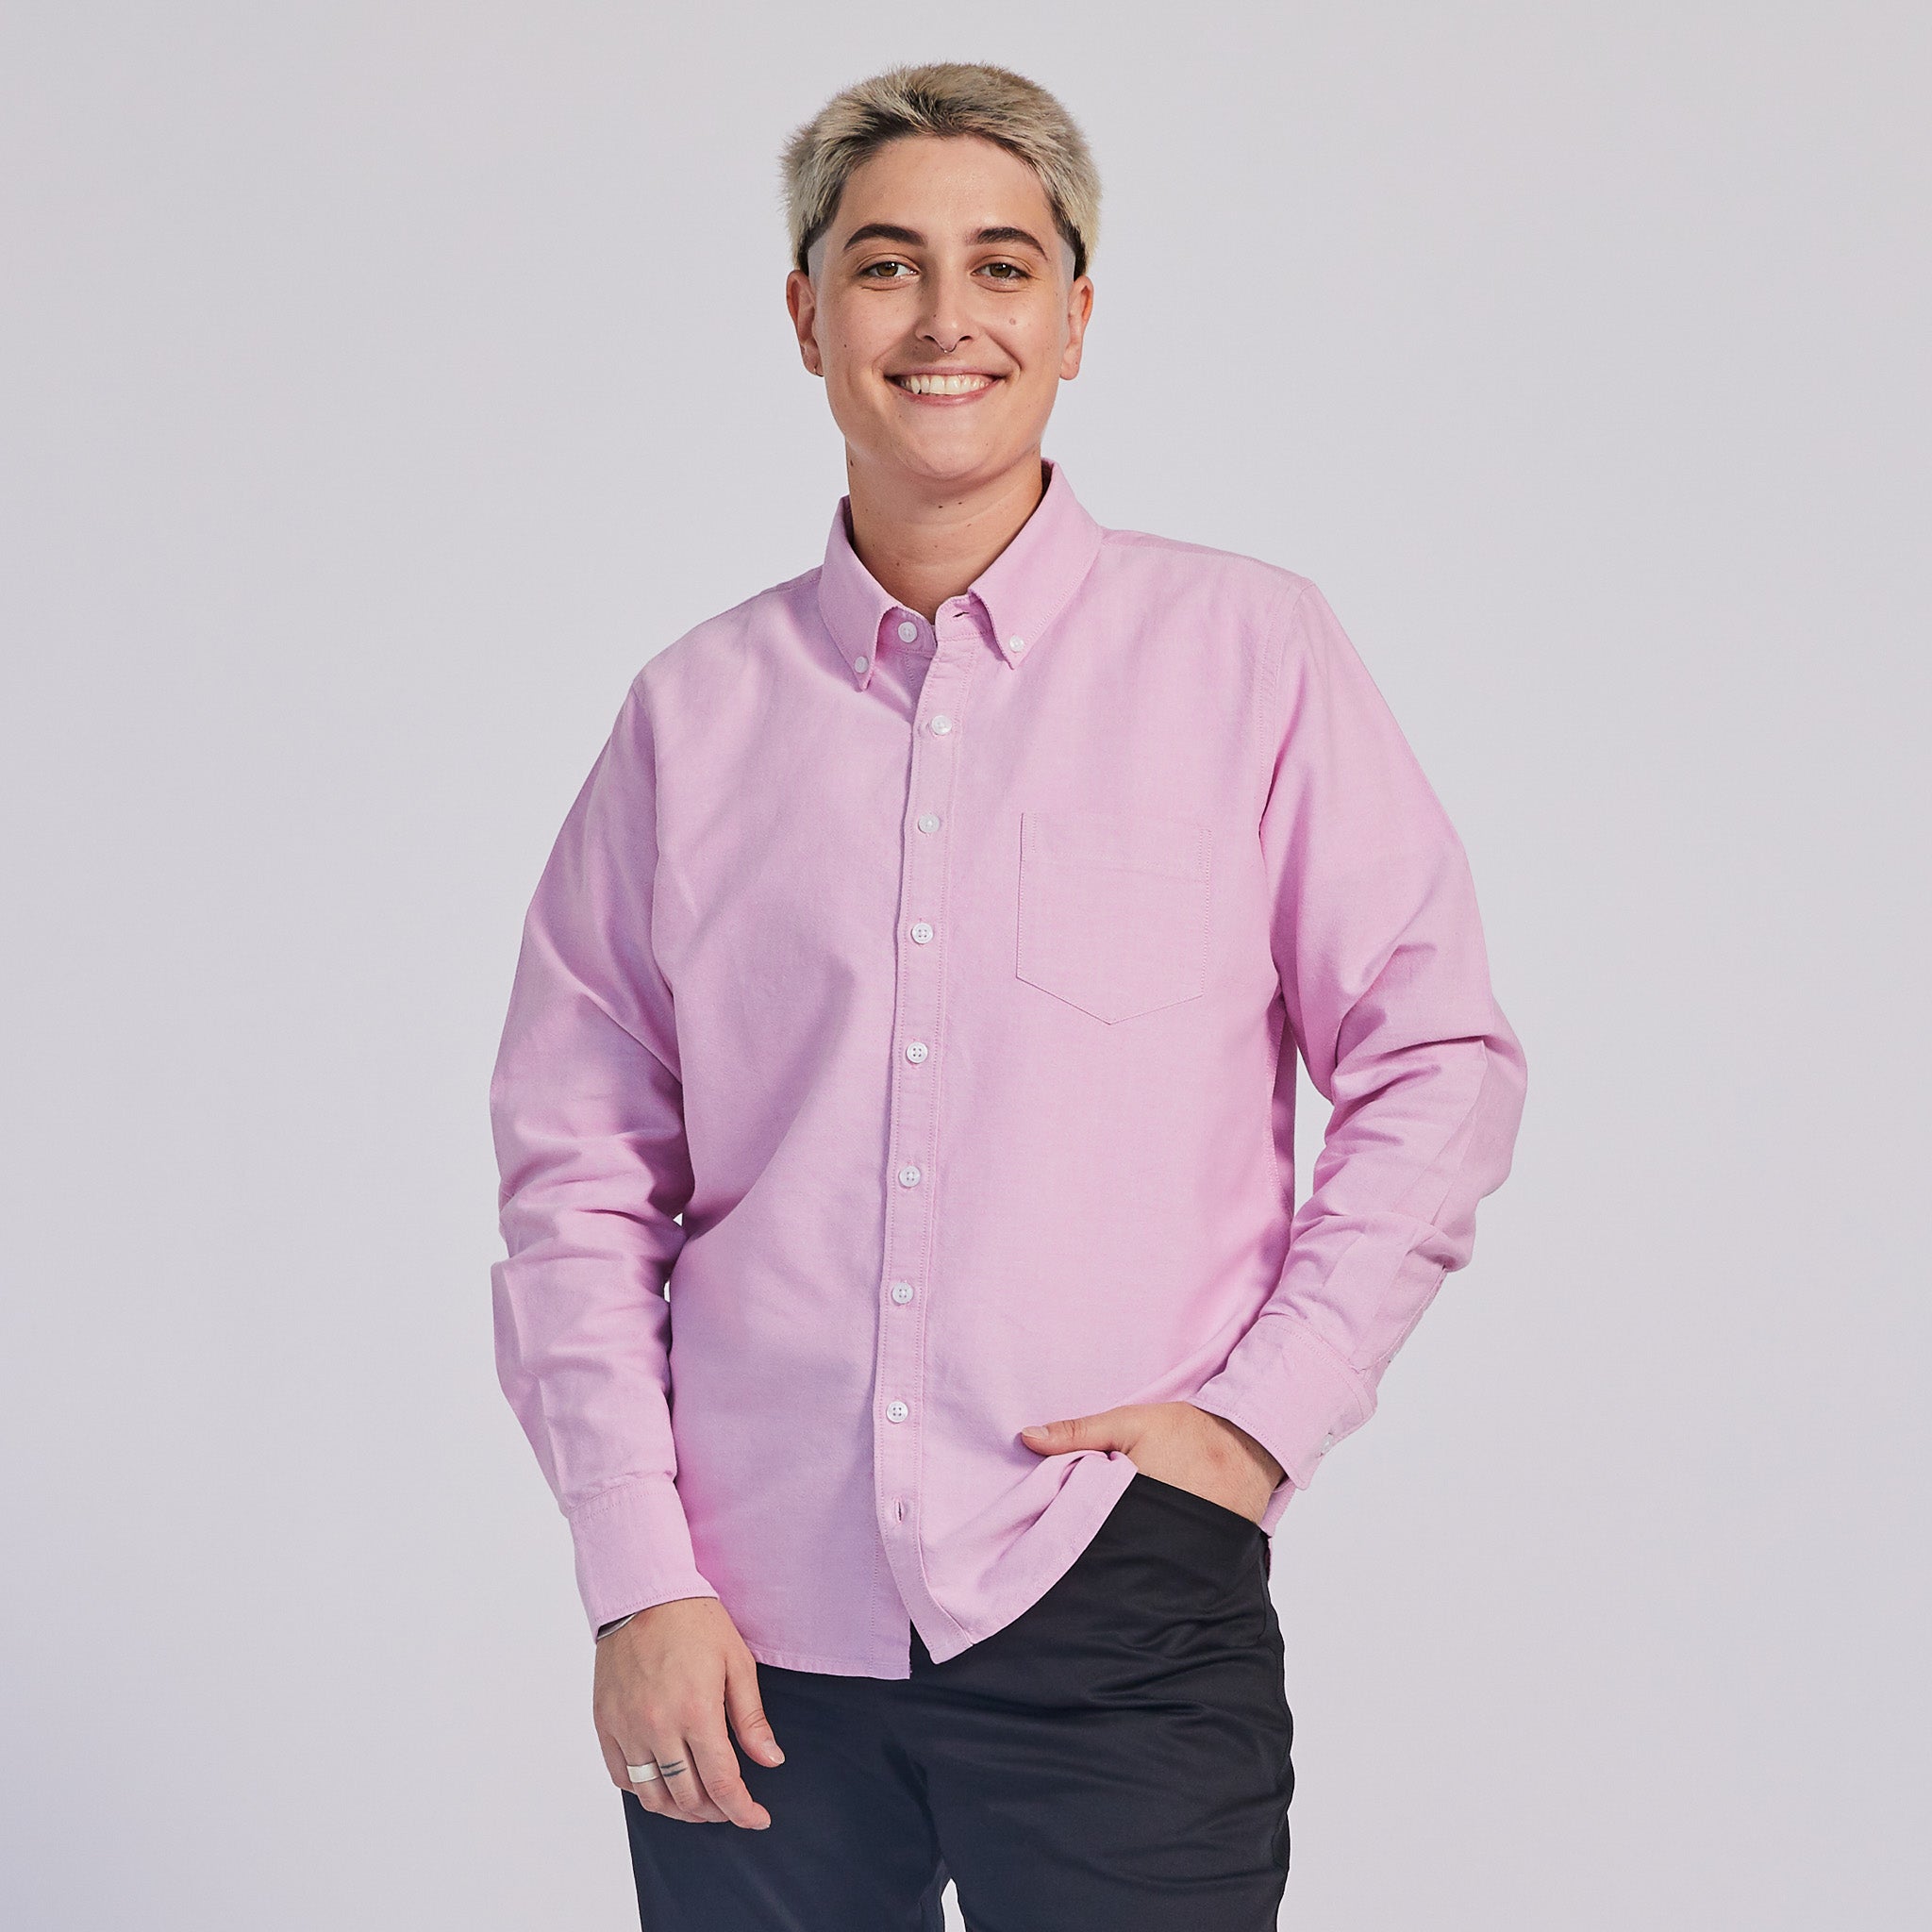 non-binary model in pink button down Oxford shirt